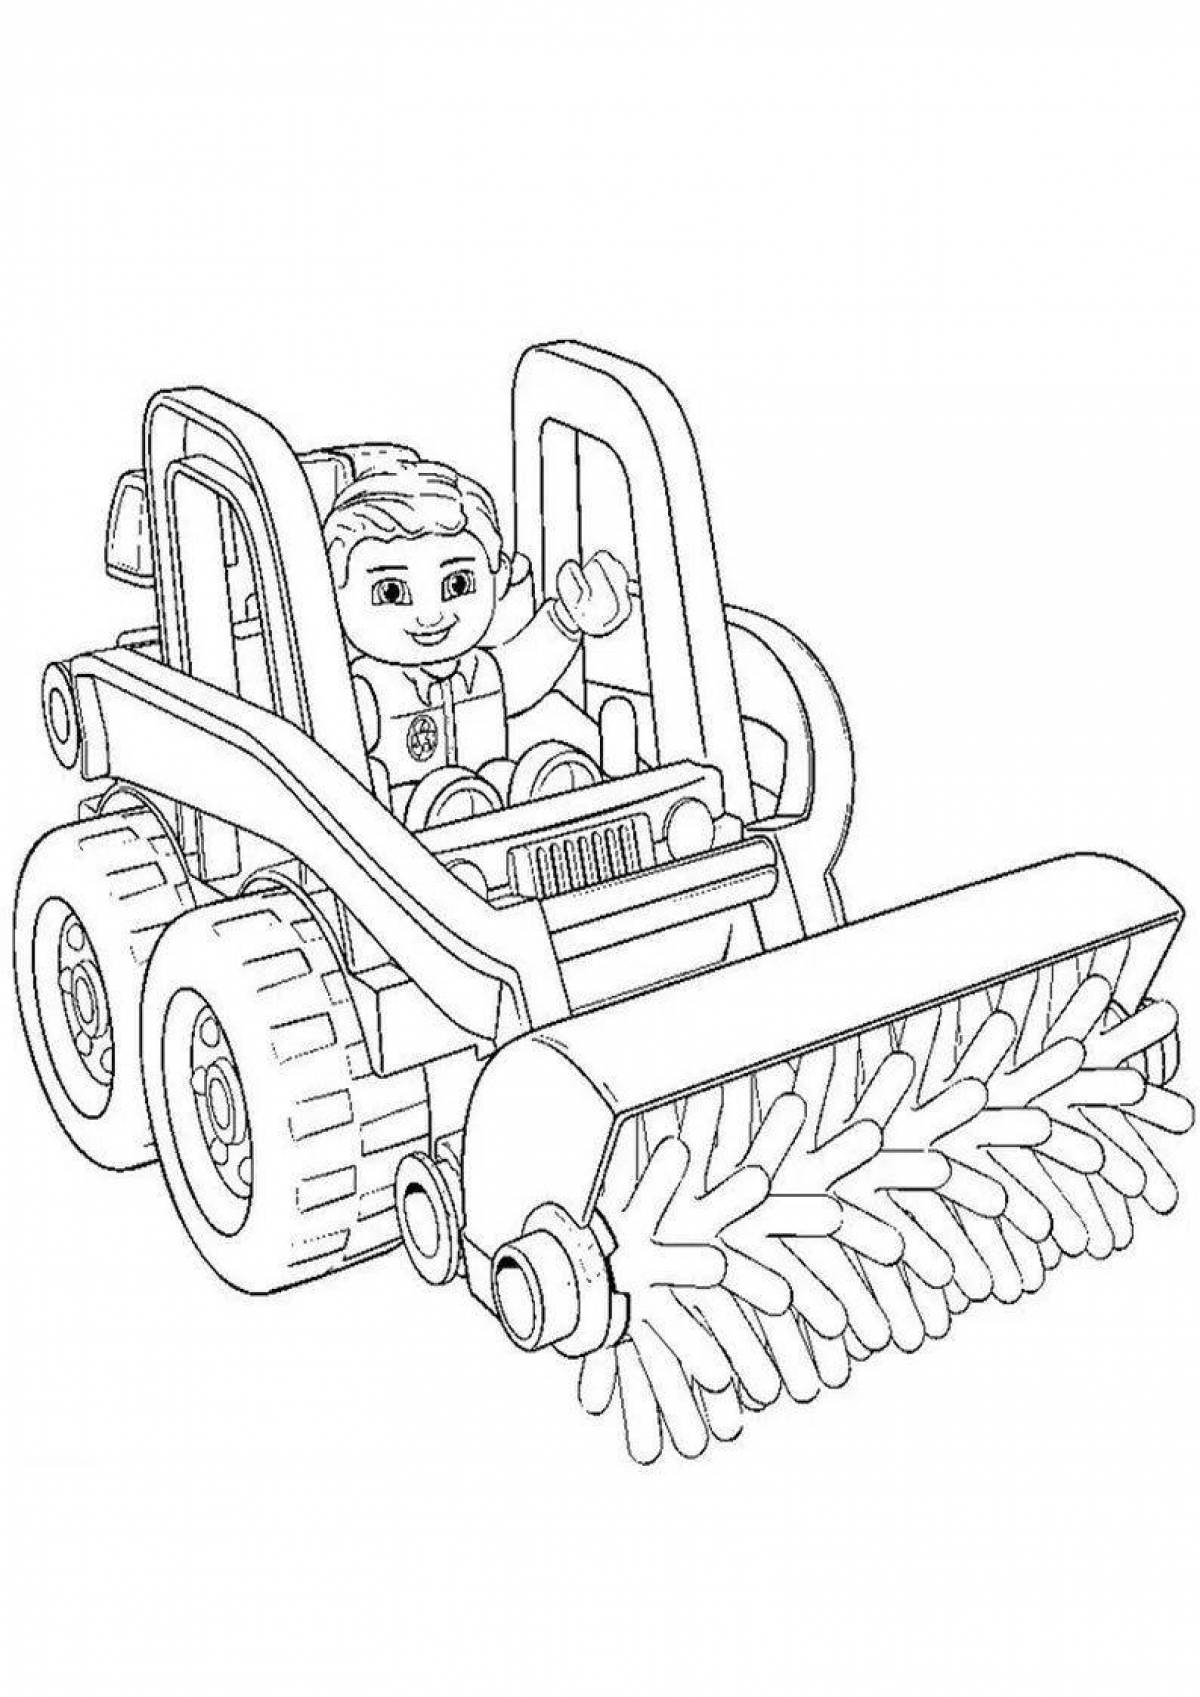 Amazing snowplow coloring page for kids